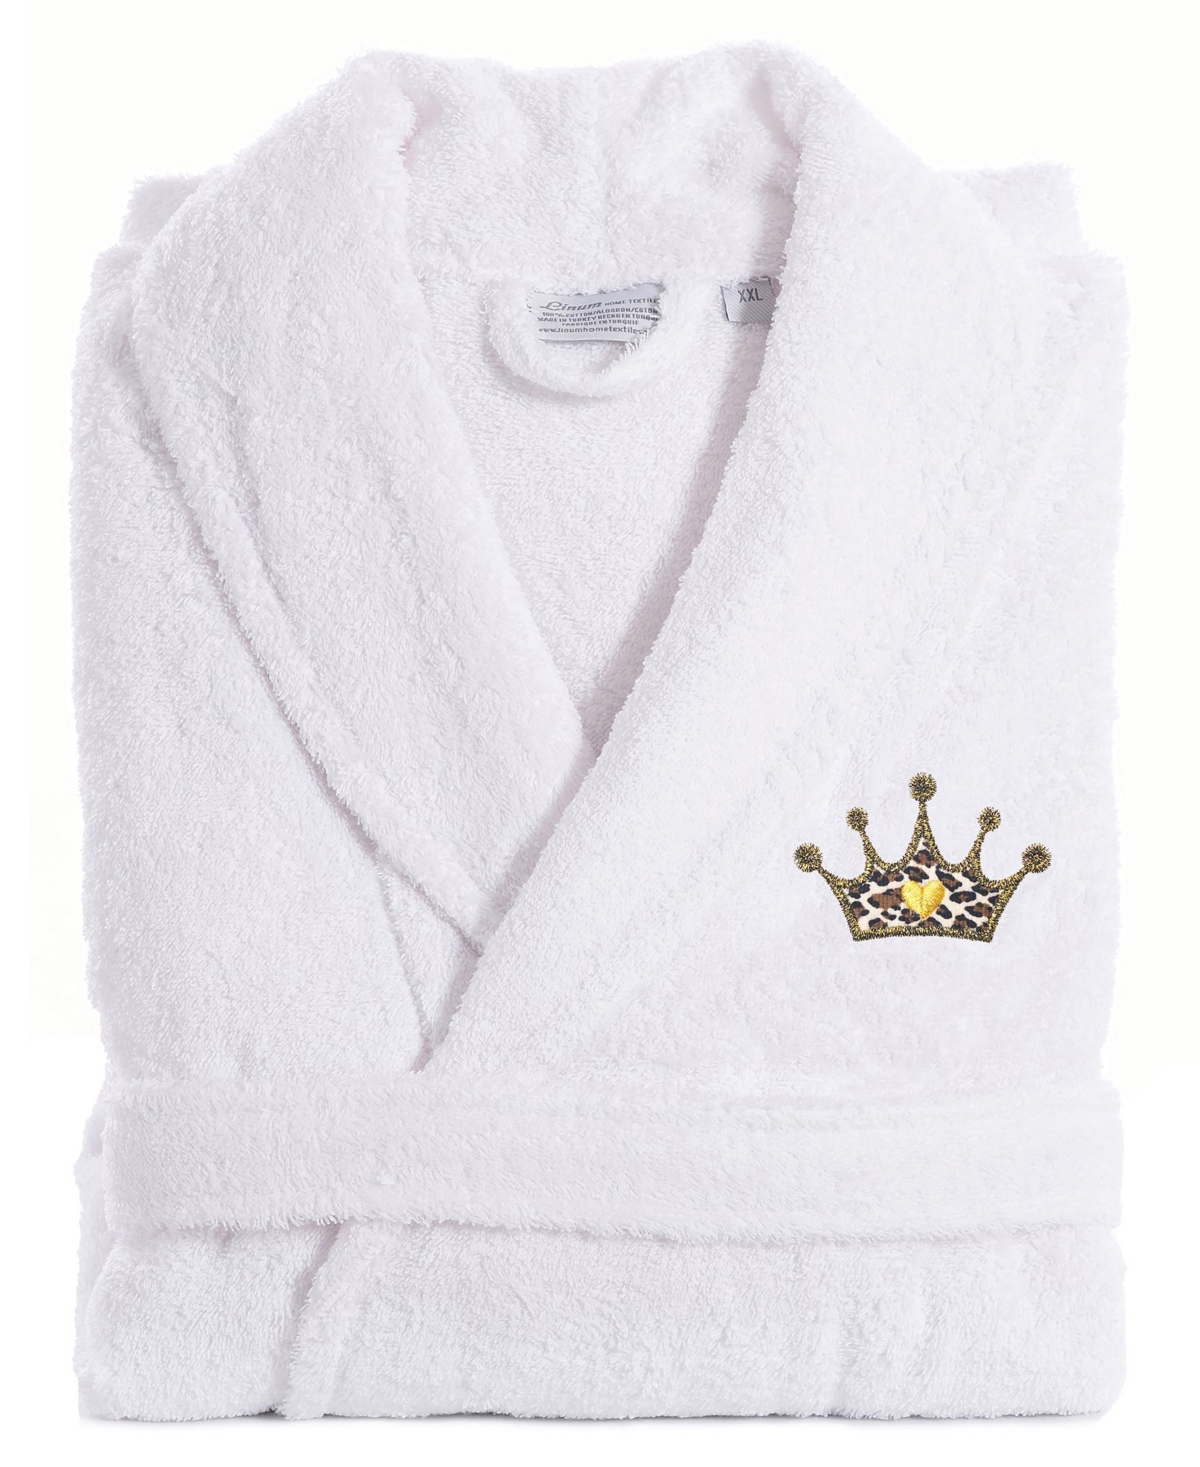 Embroidered with Cheetah Crown Terry Bath Robe - Navy